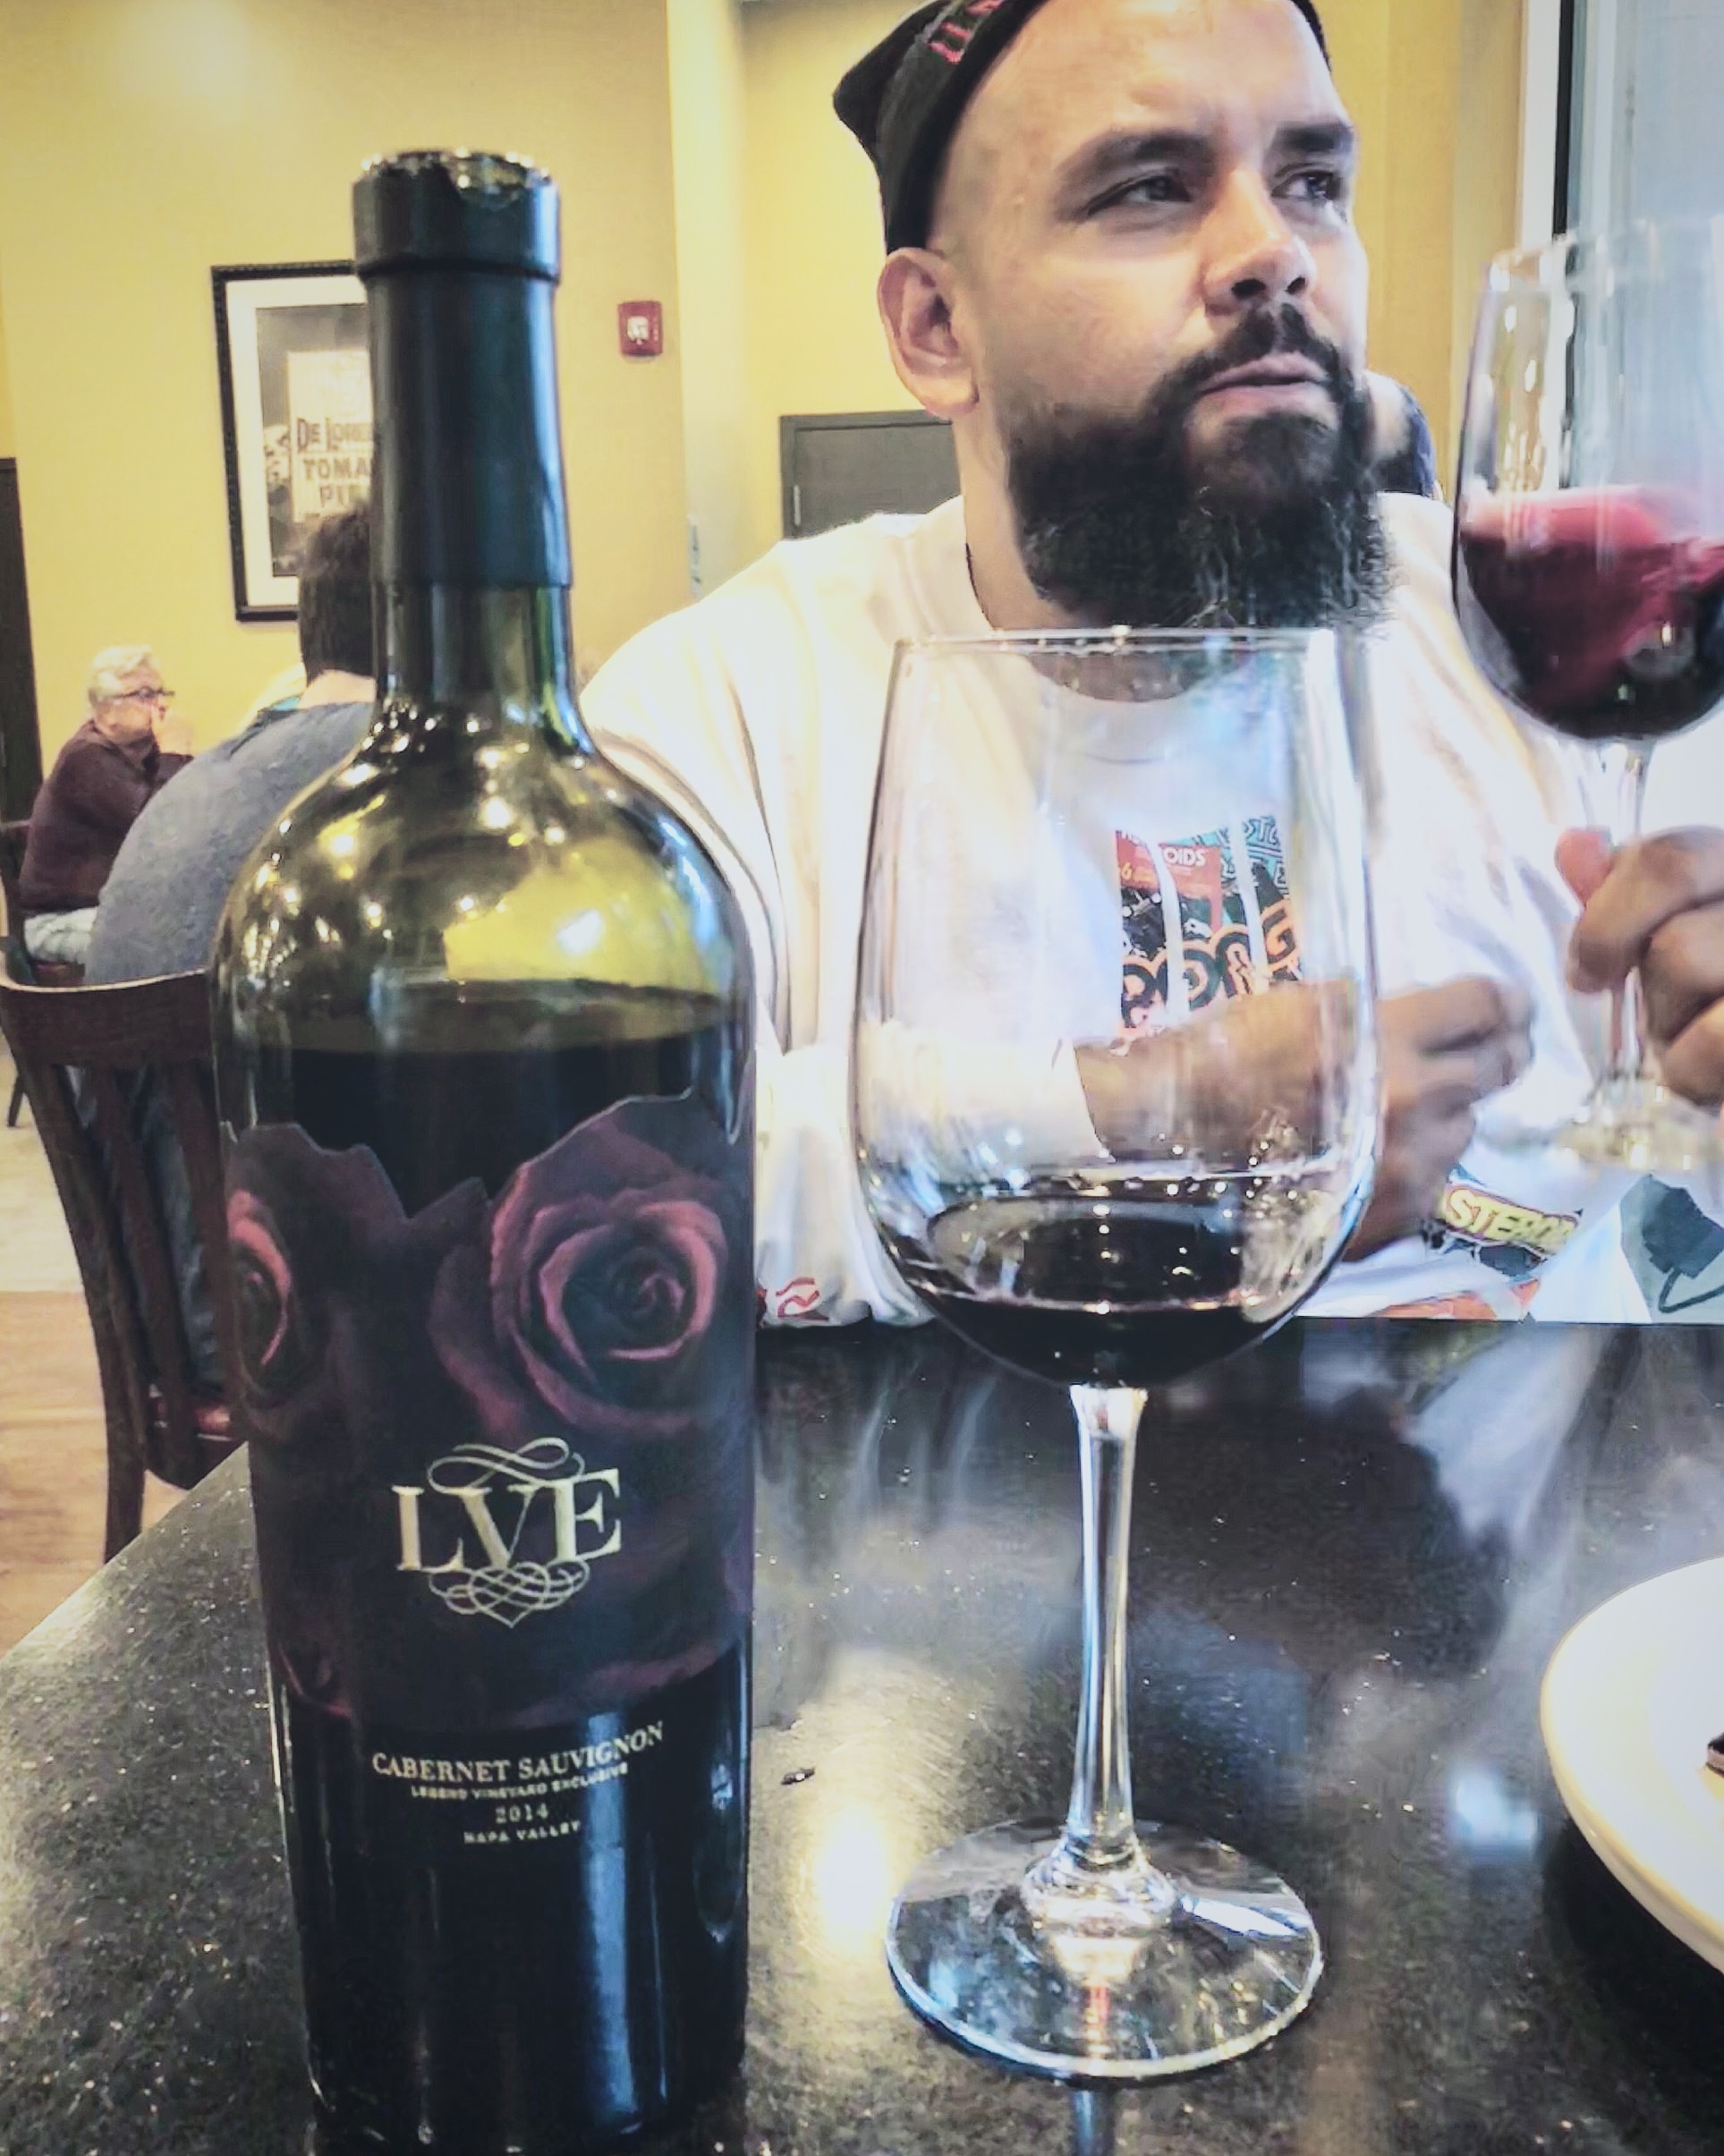 Vintage Flows: Save Room for His LVE: A Legends Wine Review